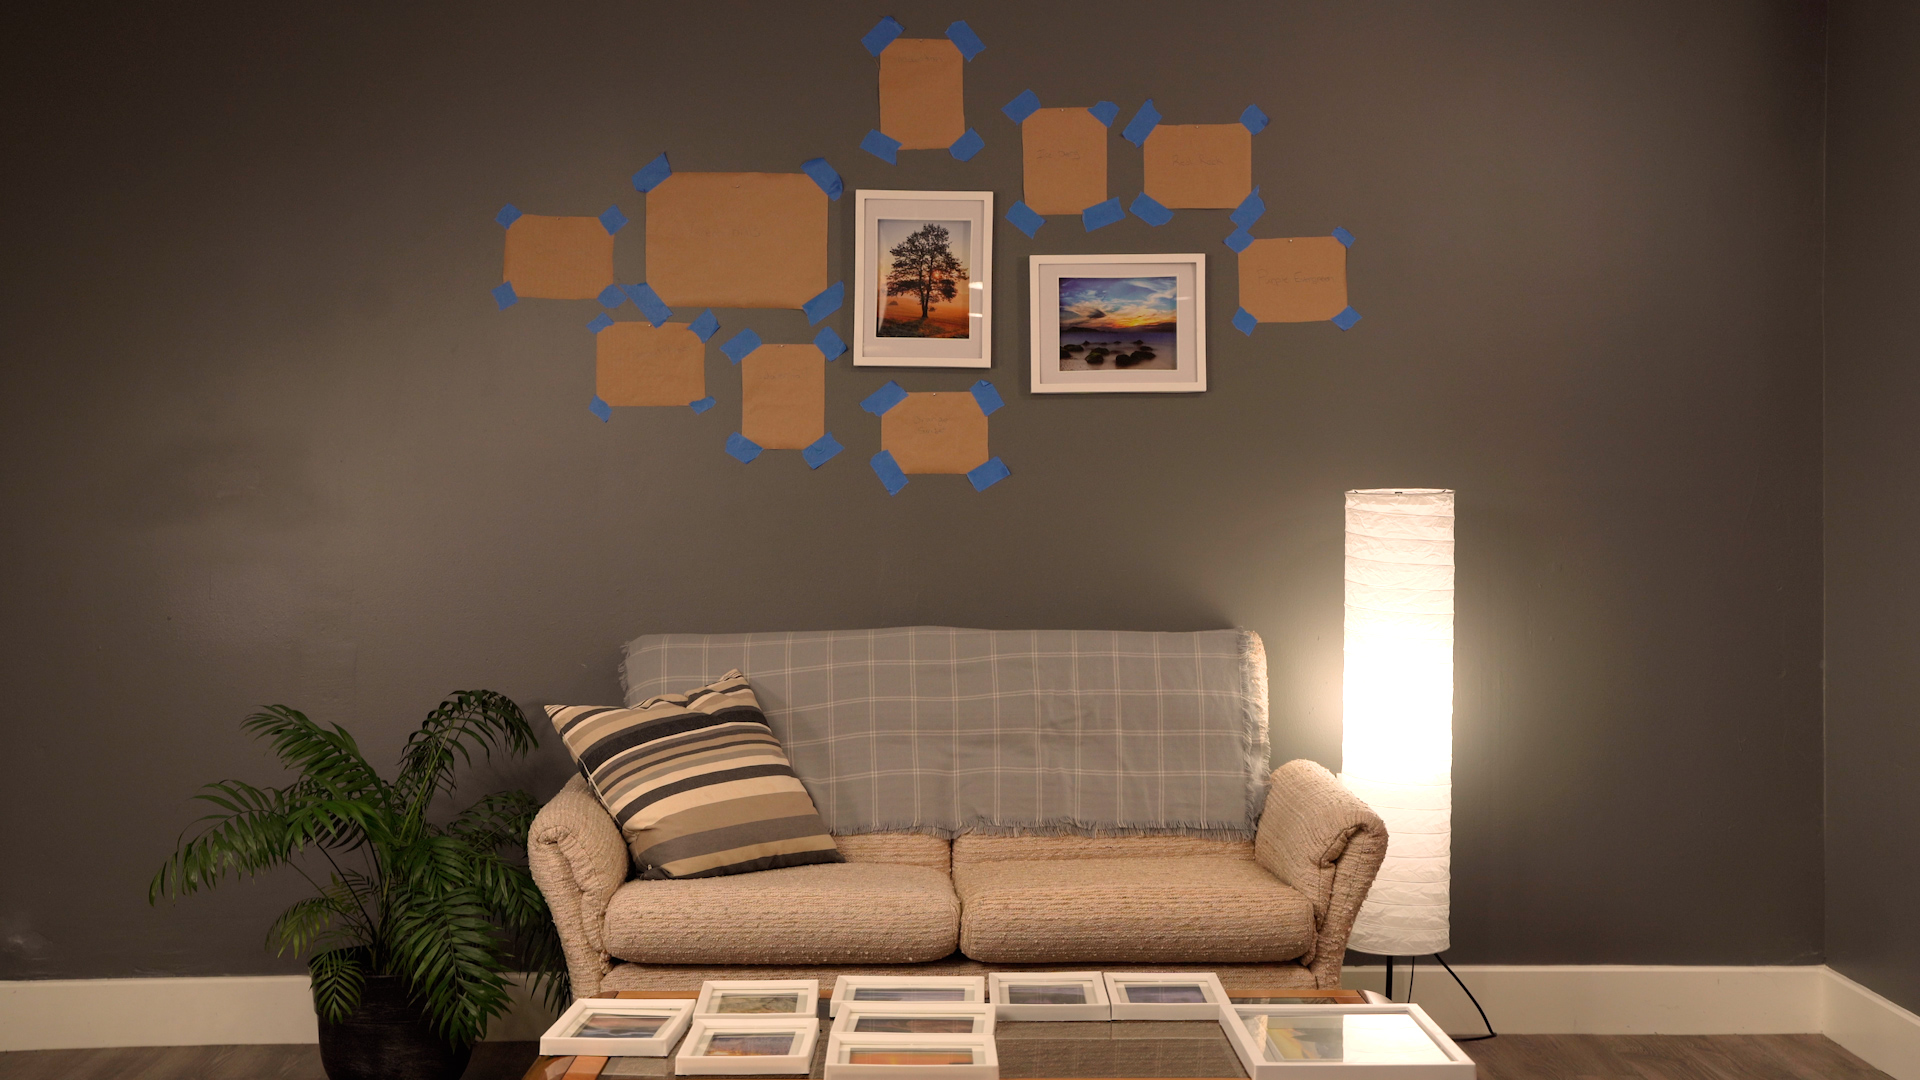 placing pictures over gallery wall templates